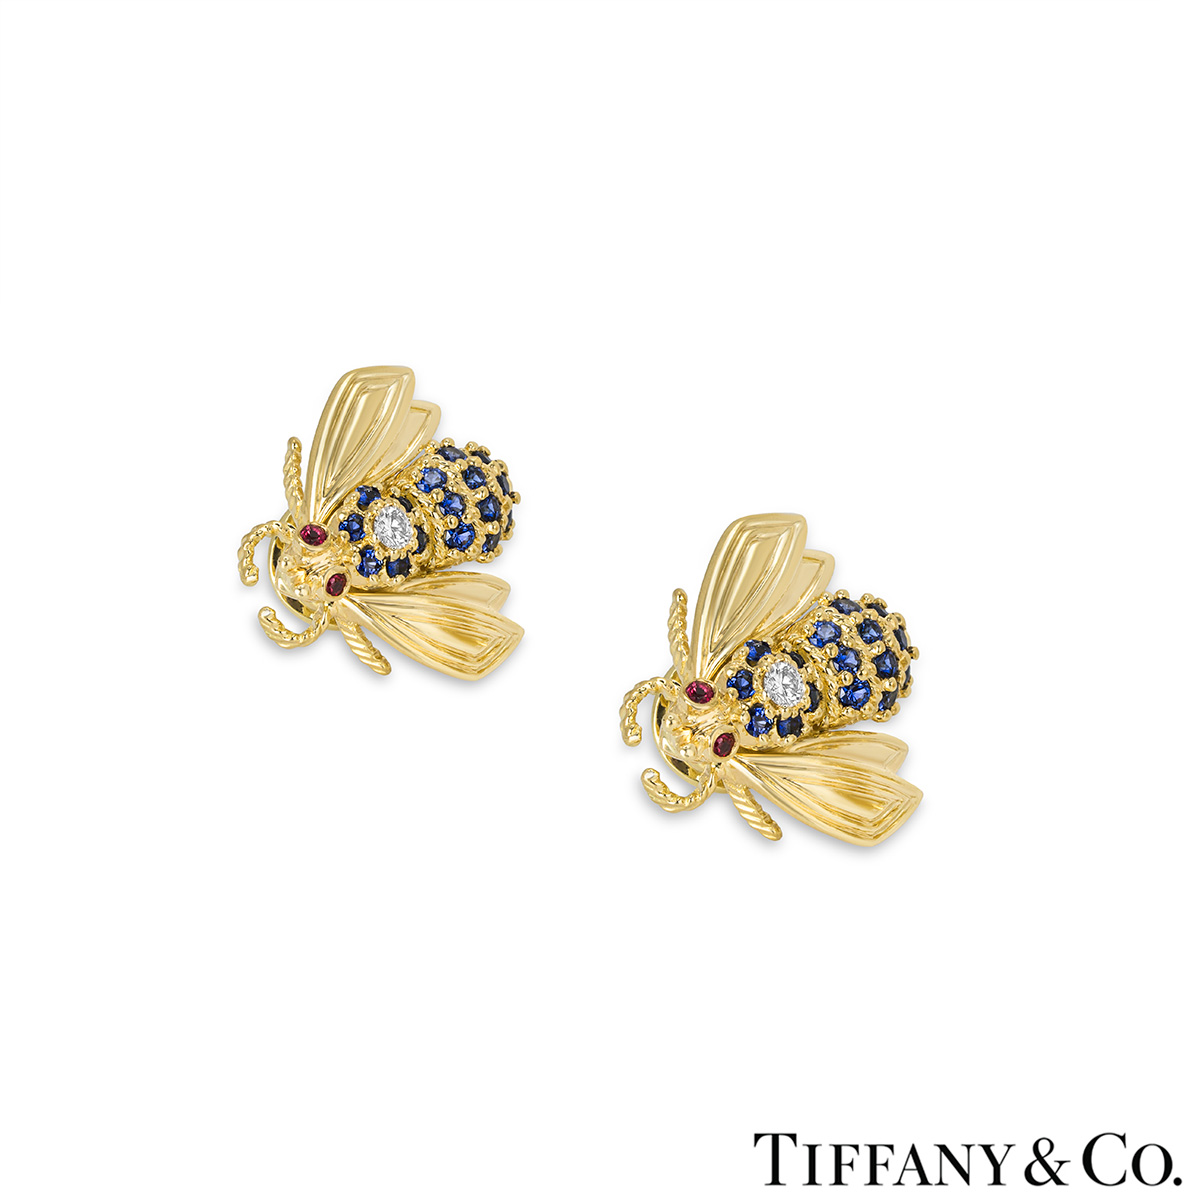 Tiffany & Co. Yellow Gold, Diamond, Sapphire and Ruby Bee Earrings